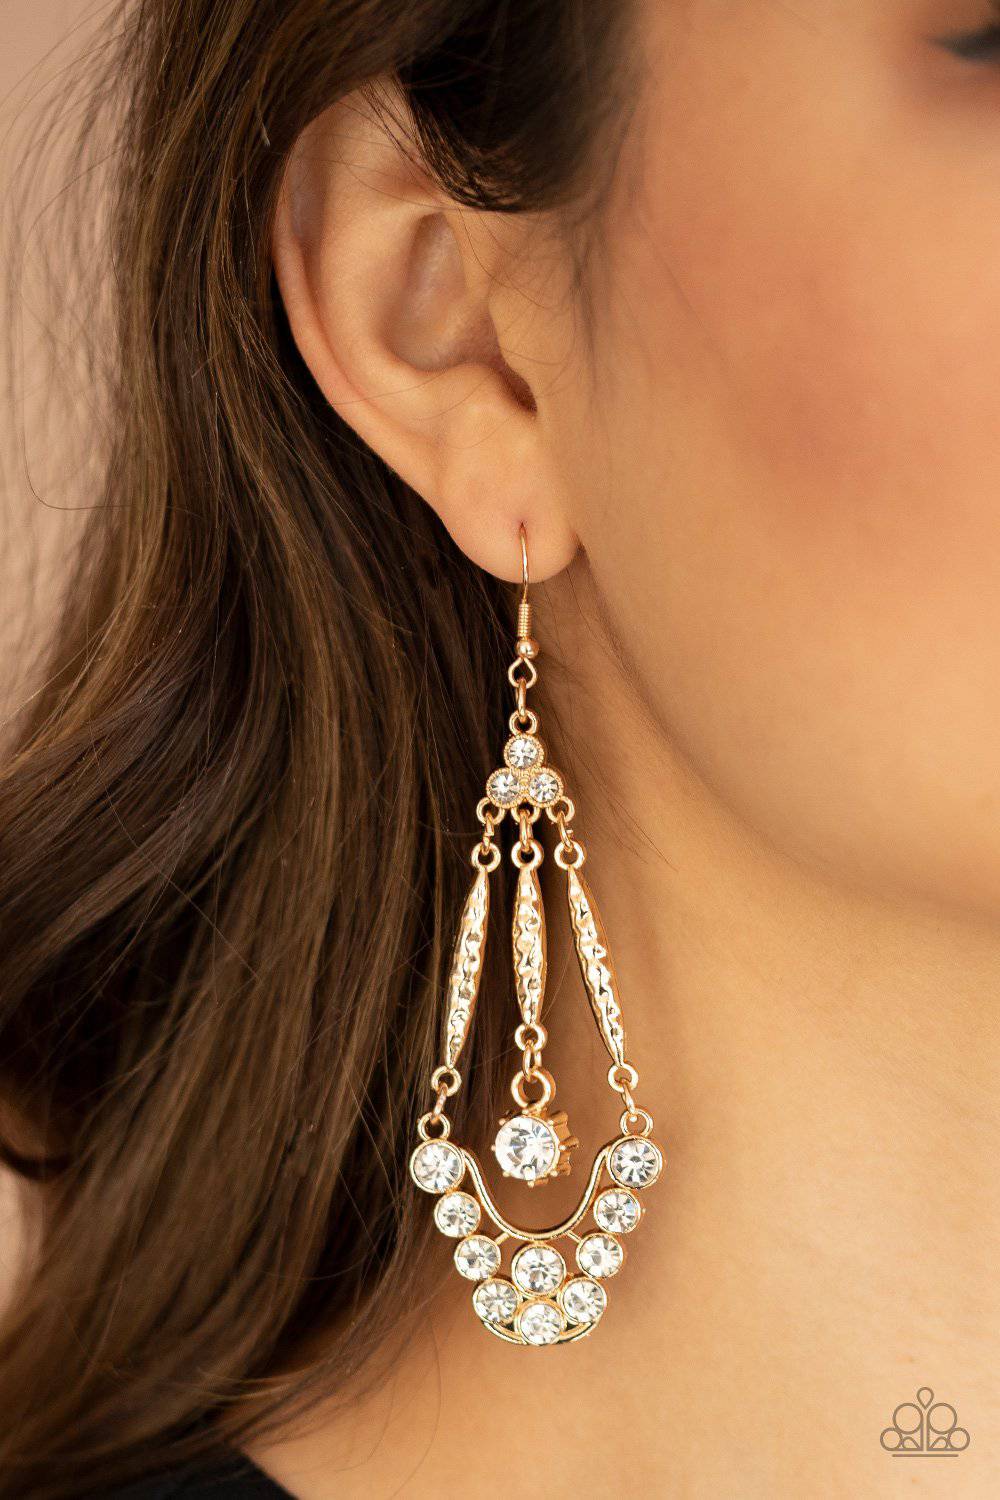 D301 - High-Ranking Radiance, Paparazzi Gold Earring by Paparazzi Accessories on Fancy5Fashion.com